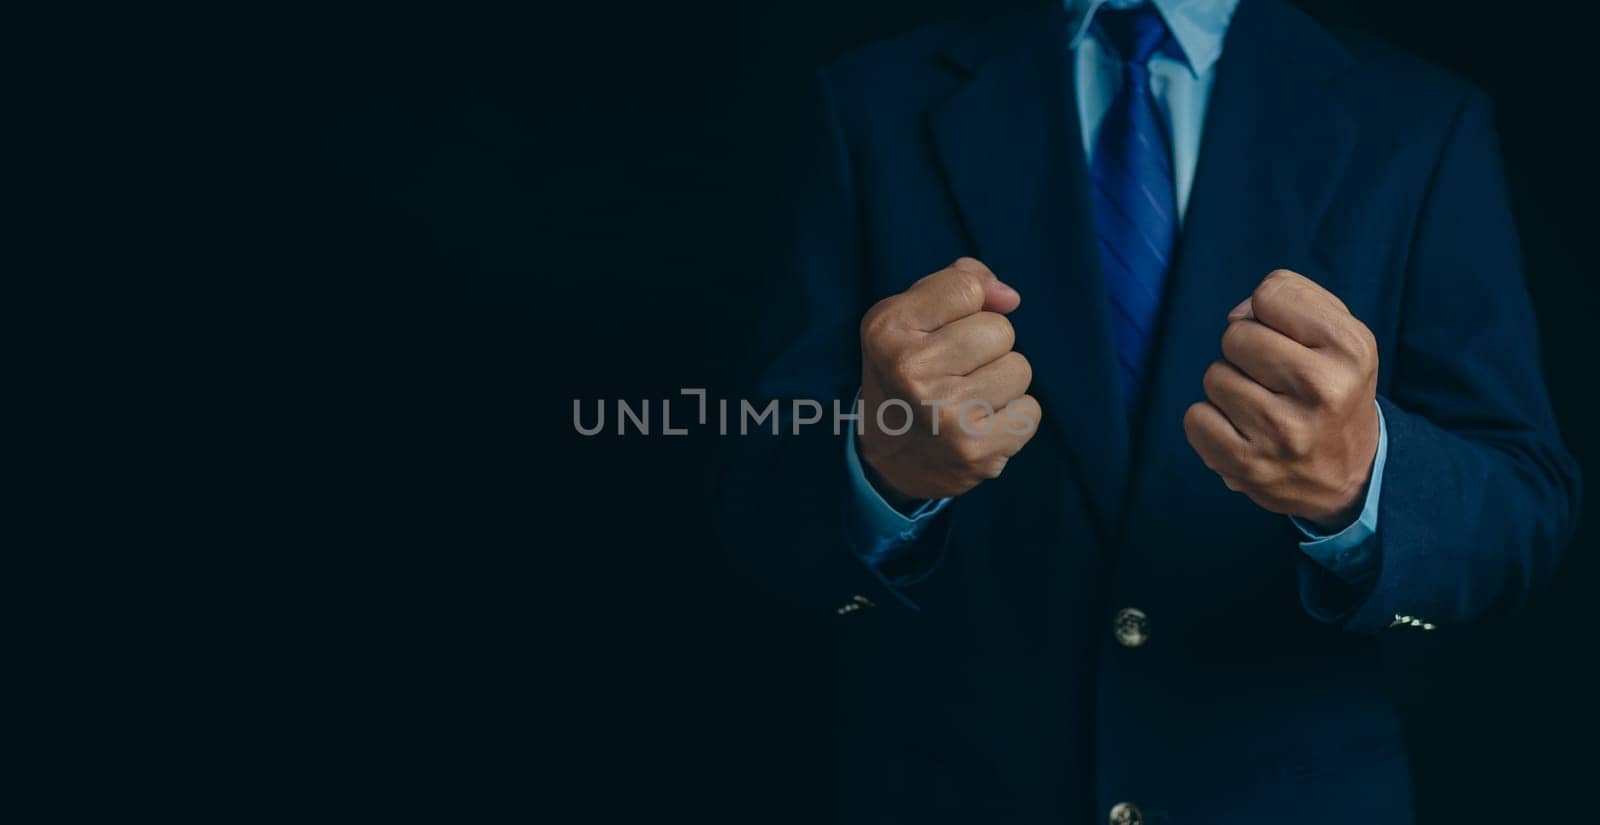 Businessman in a suit stands and makes a fist gesture on a dark background. by Unimages2527